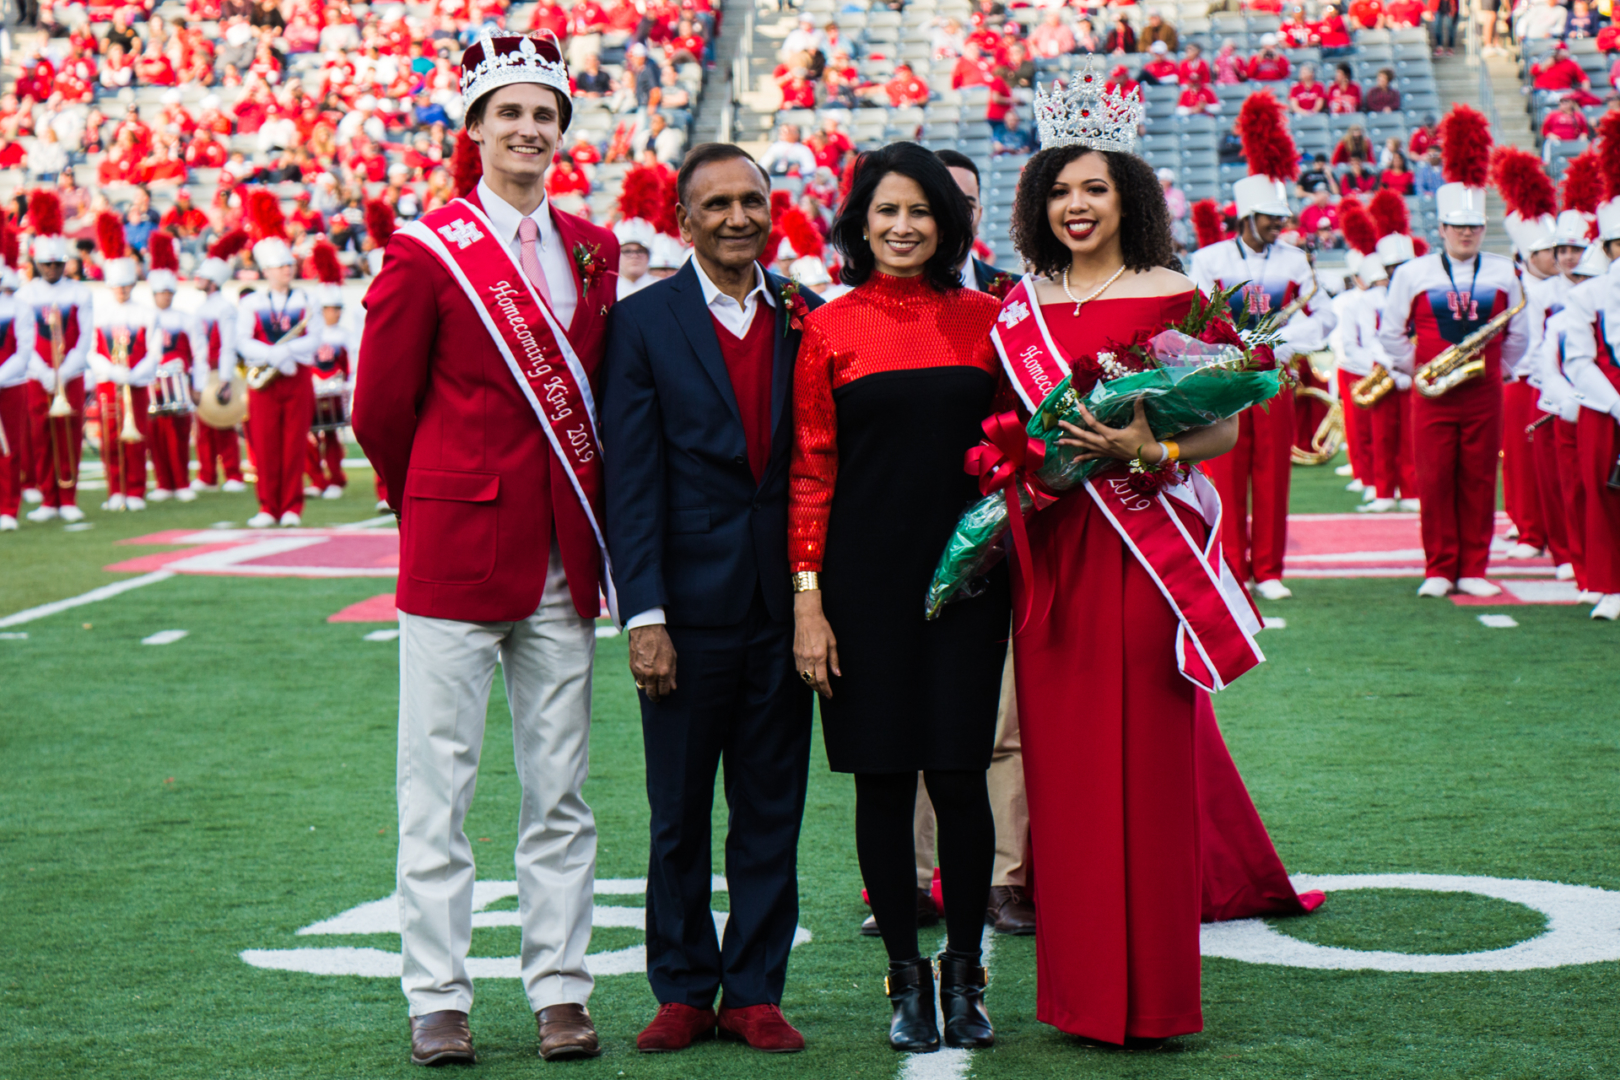 Business management senior John Austin Schaudel and hotel and restaurant management senior Chelsea Lawson pictured with President Renu Khator and her husband Suresh Khator. Lawson and Schaudel were crowned homecoming king and queen during halftime of the Memphis versus Houston game. | Jiselle Santos/The Cougar